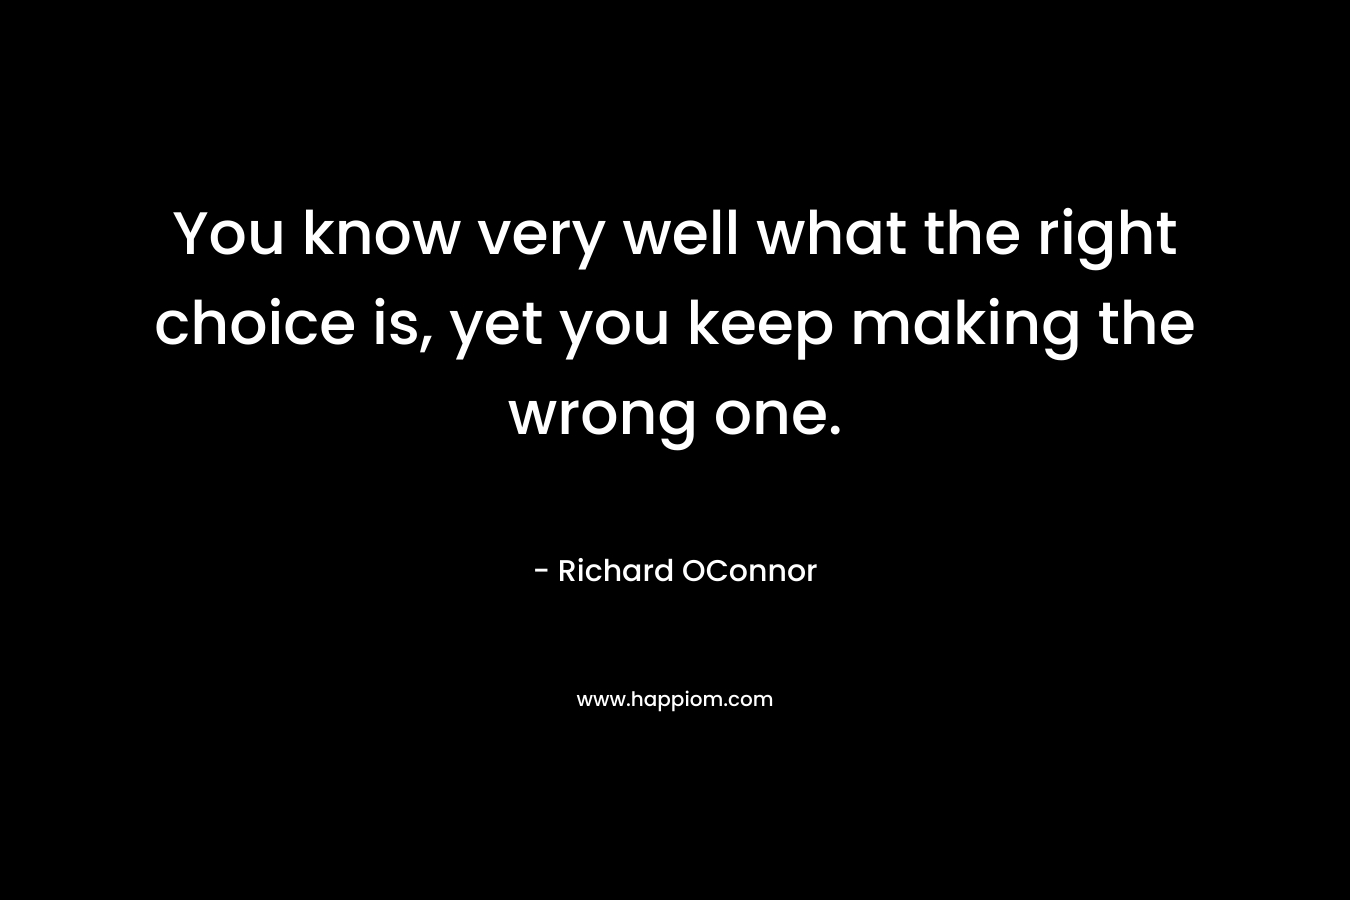 You know very well what the right choice is, yet you keep making the wrong one. – Richard OConnor